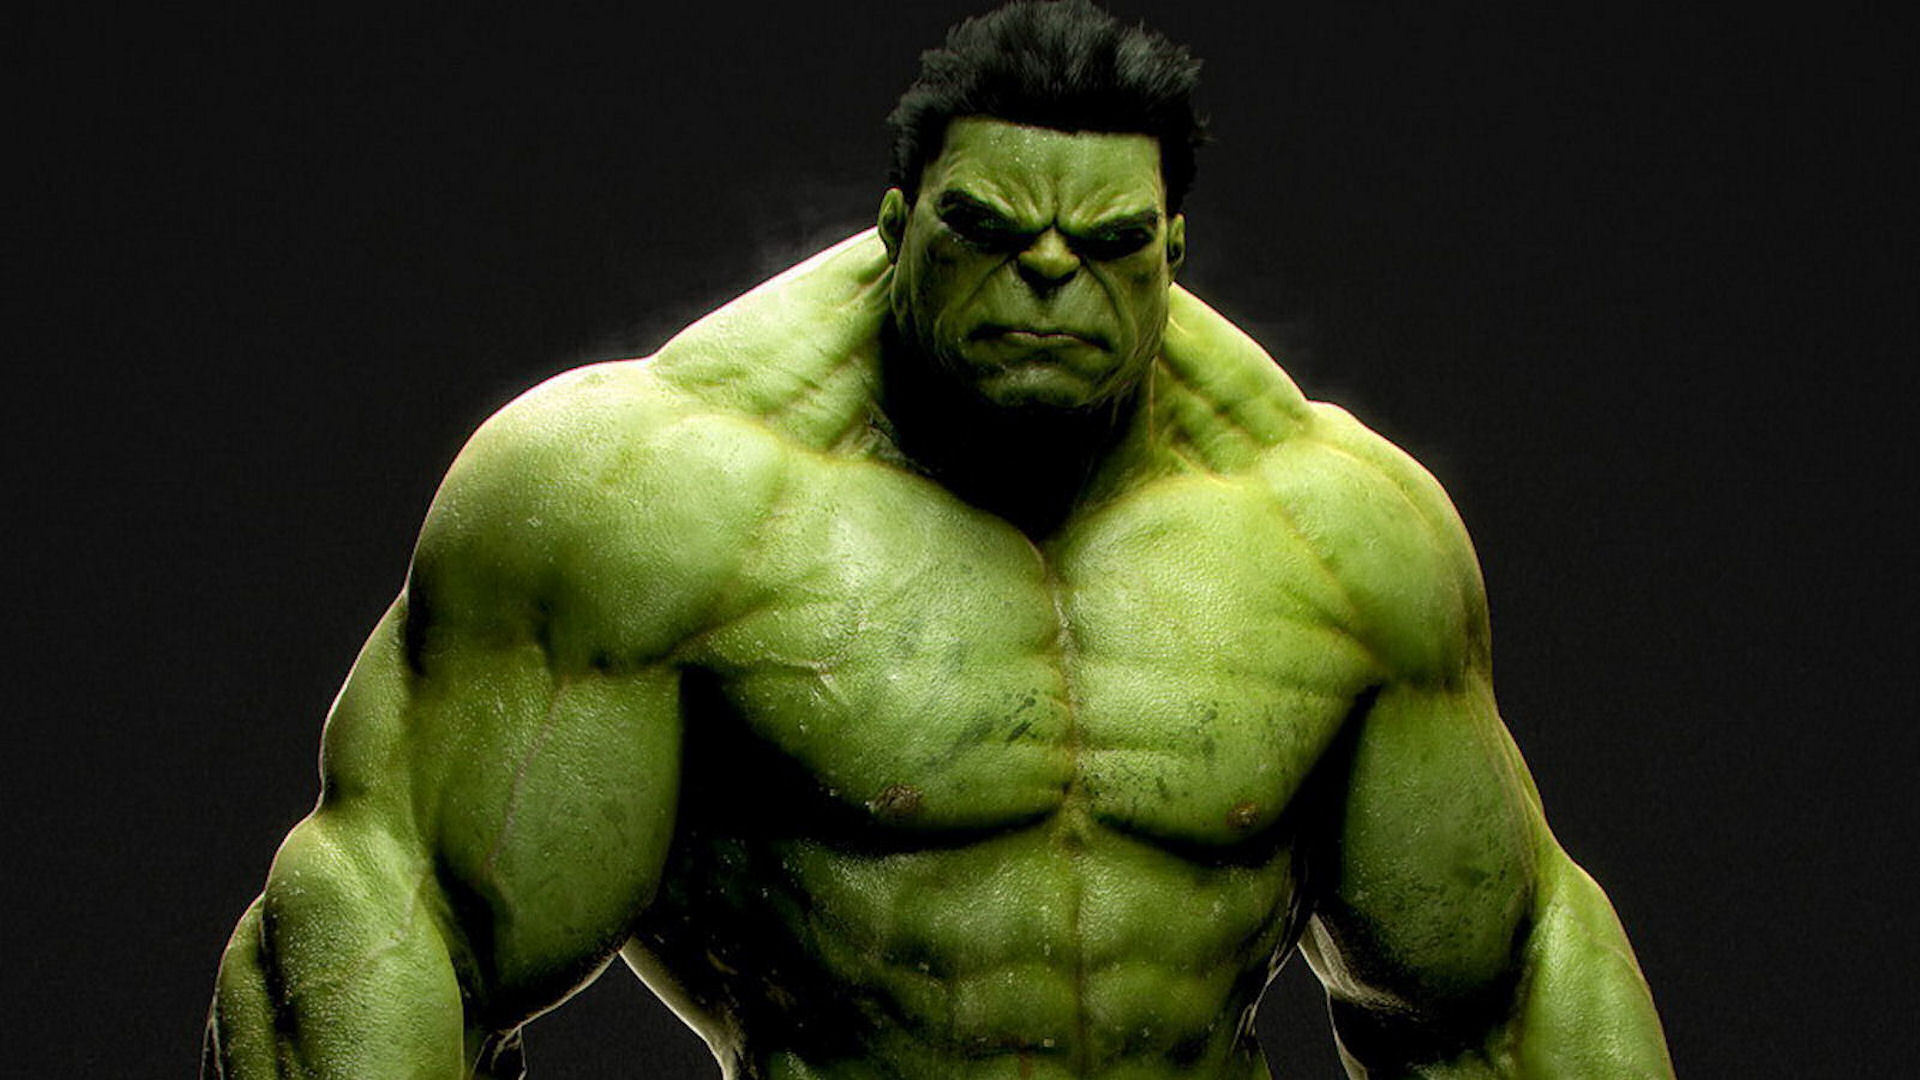 Hulk wallpapers HD pictures images.